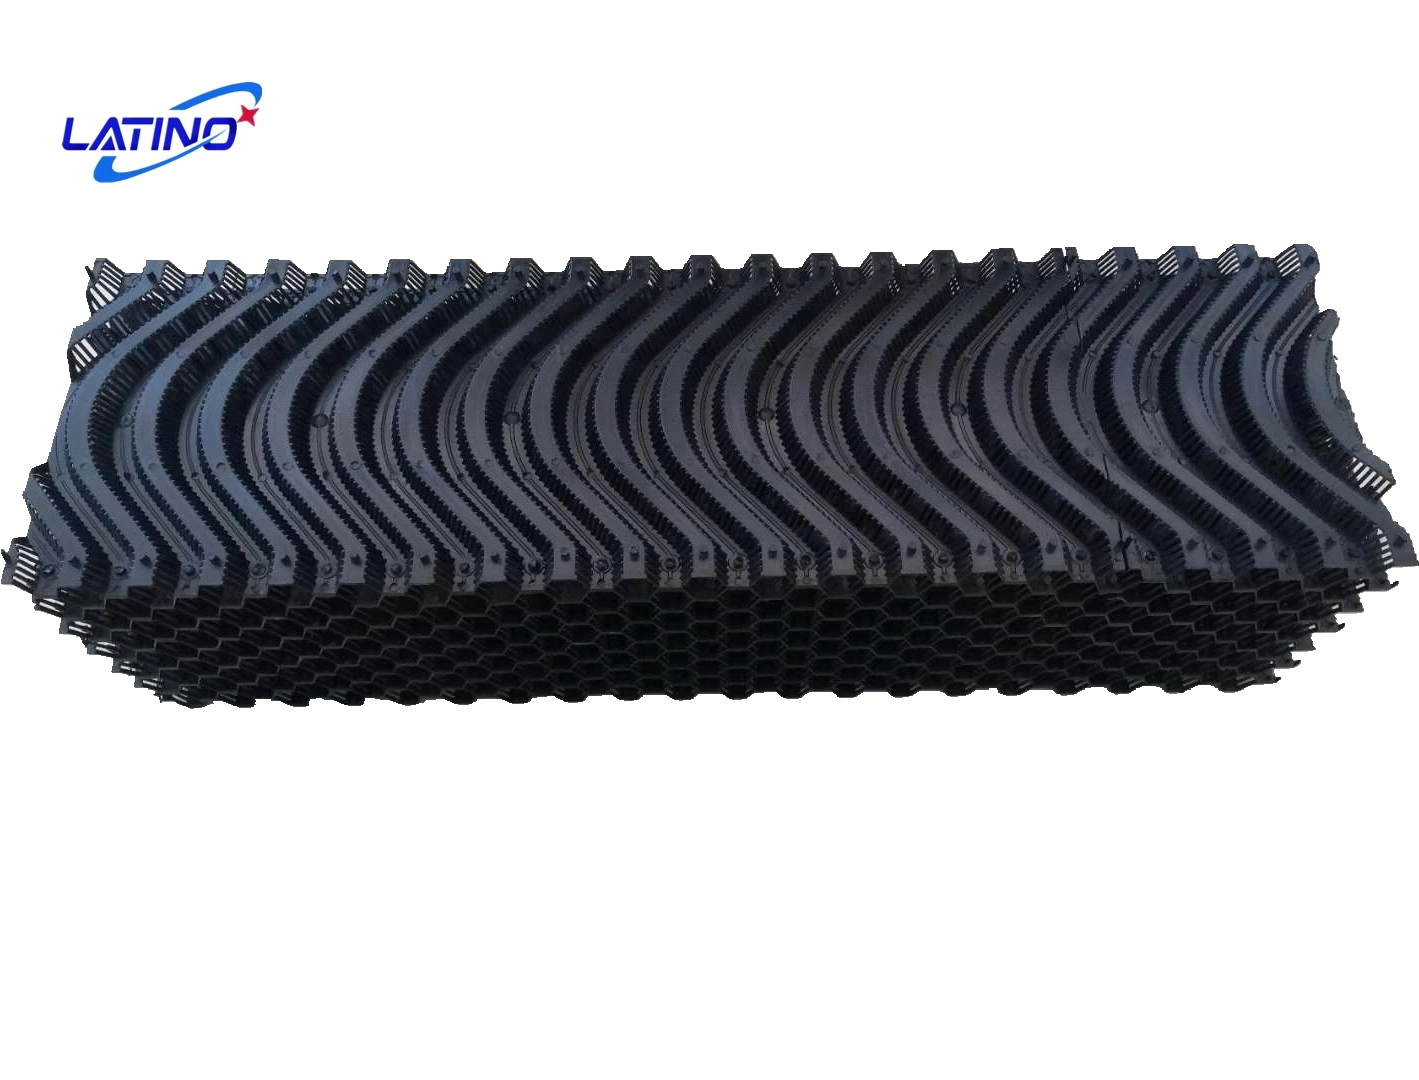 Greenhouse and Poultry Equipment Honeycomb Evaporative Plastic Cooling Pad